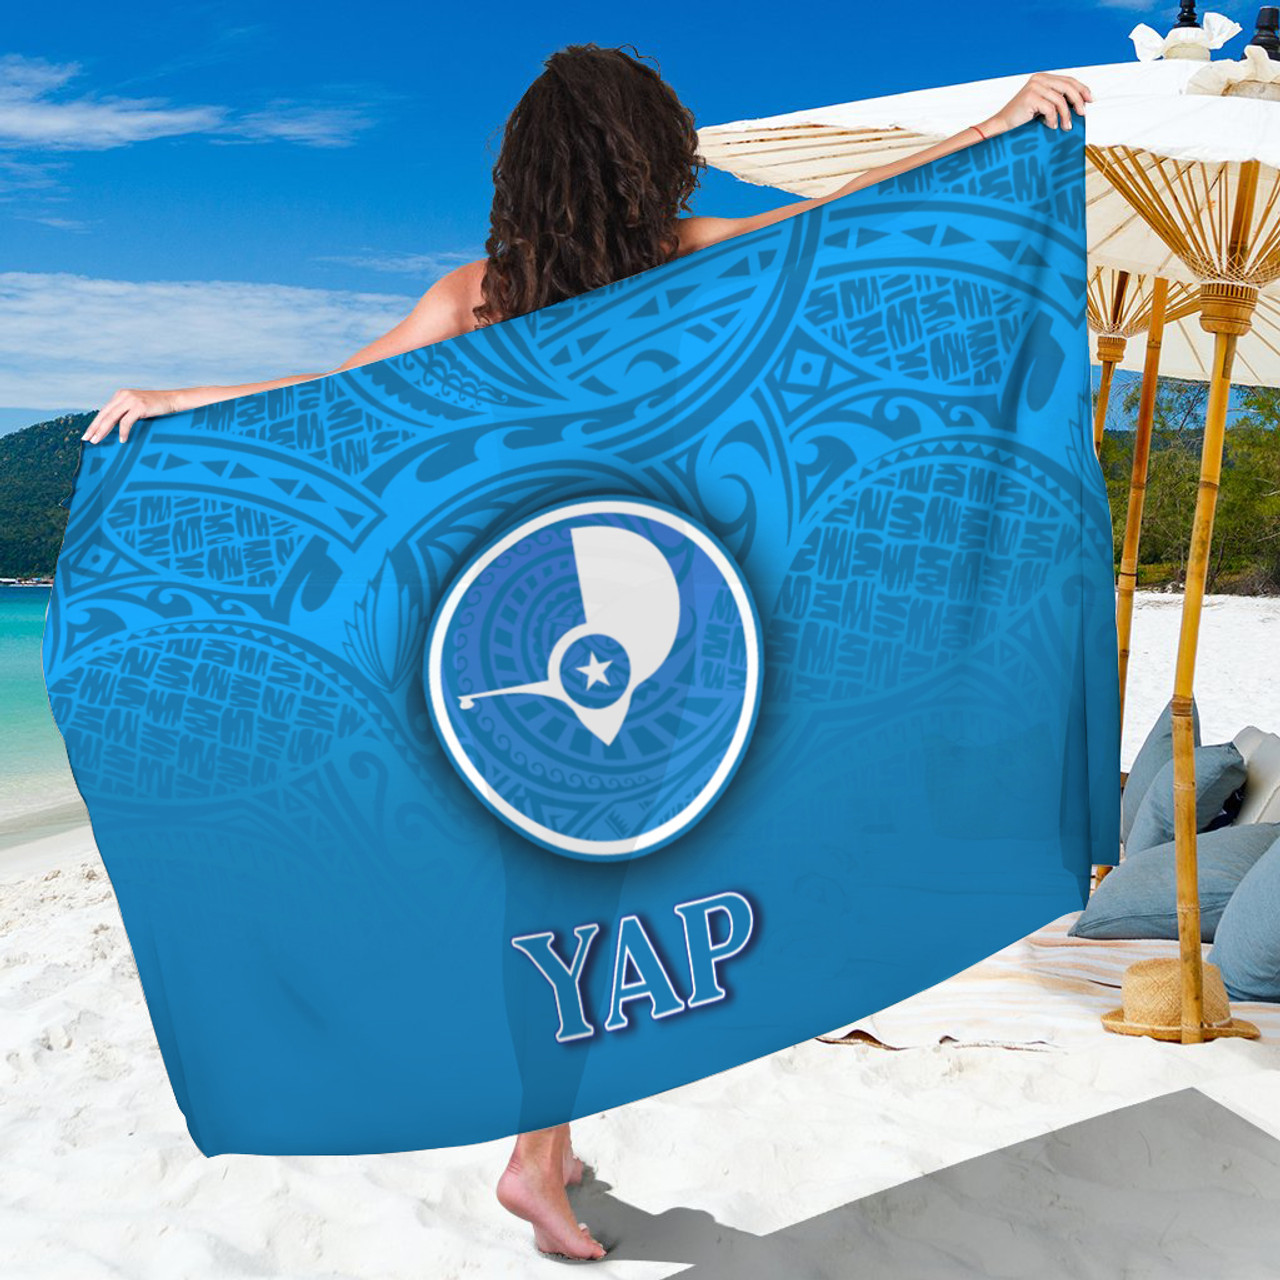 Yap Islands Flag Color With Traditional Patterns Sarong